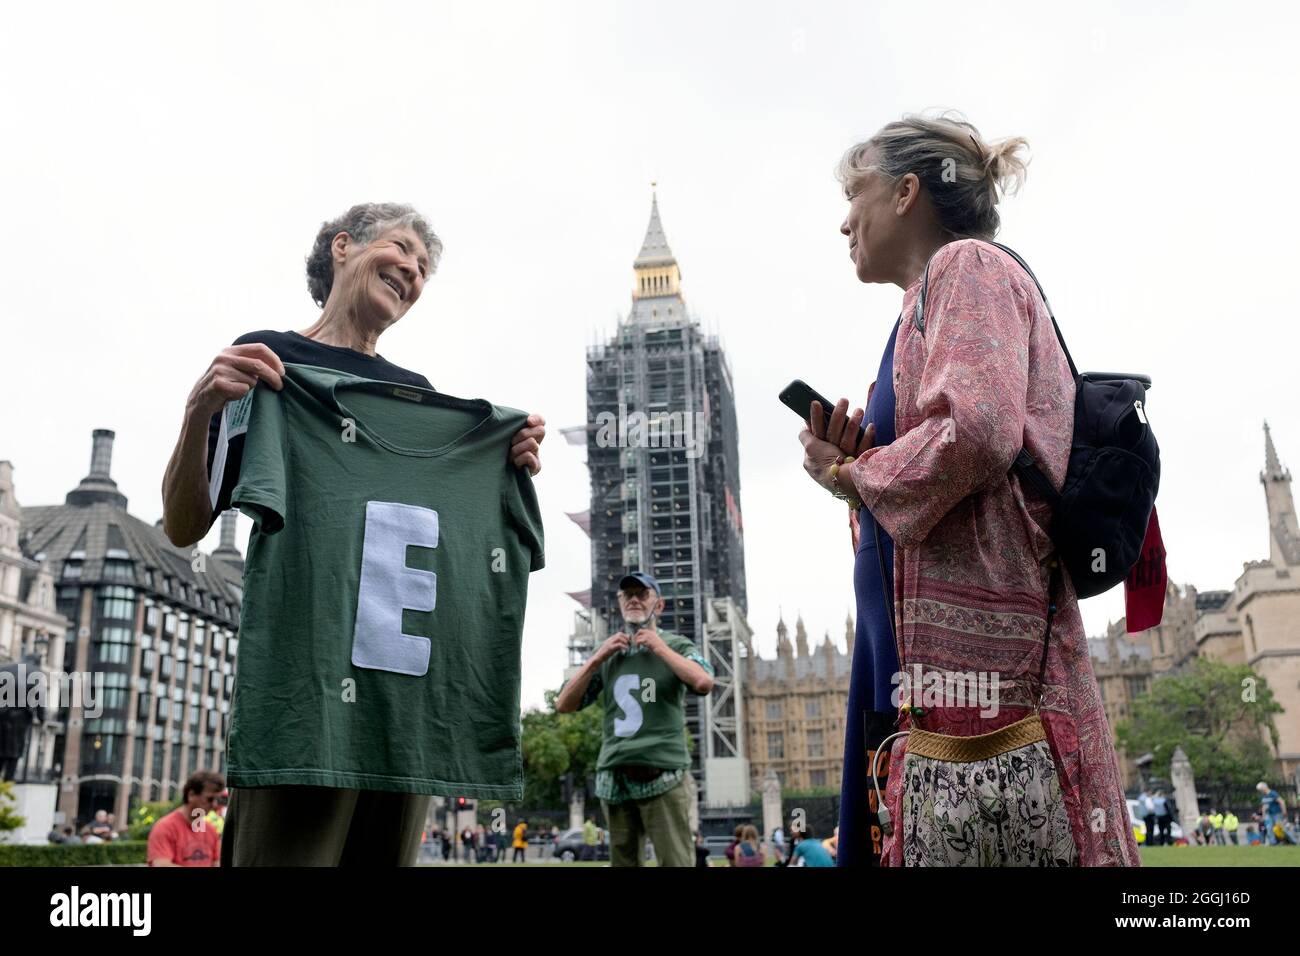 London, United Kingdom, September 1, 2021. Two protestors converse as they await the start of Extinction Rebellion’s Greenwash Action protest in Parliament Square on the tenth day of their Impossible Rebellion protests in London, United Kingdom on September 1, 2021. Stock Photo